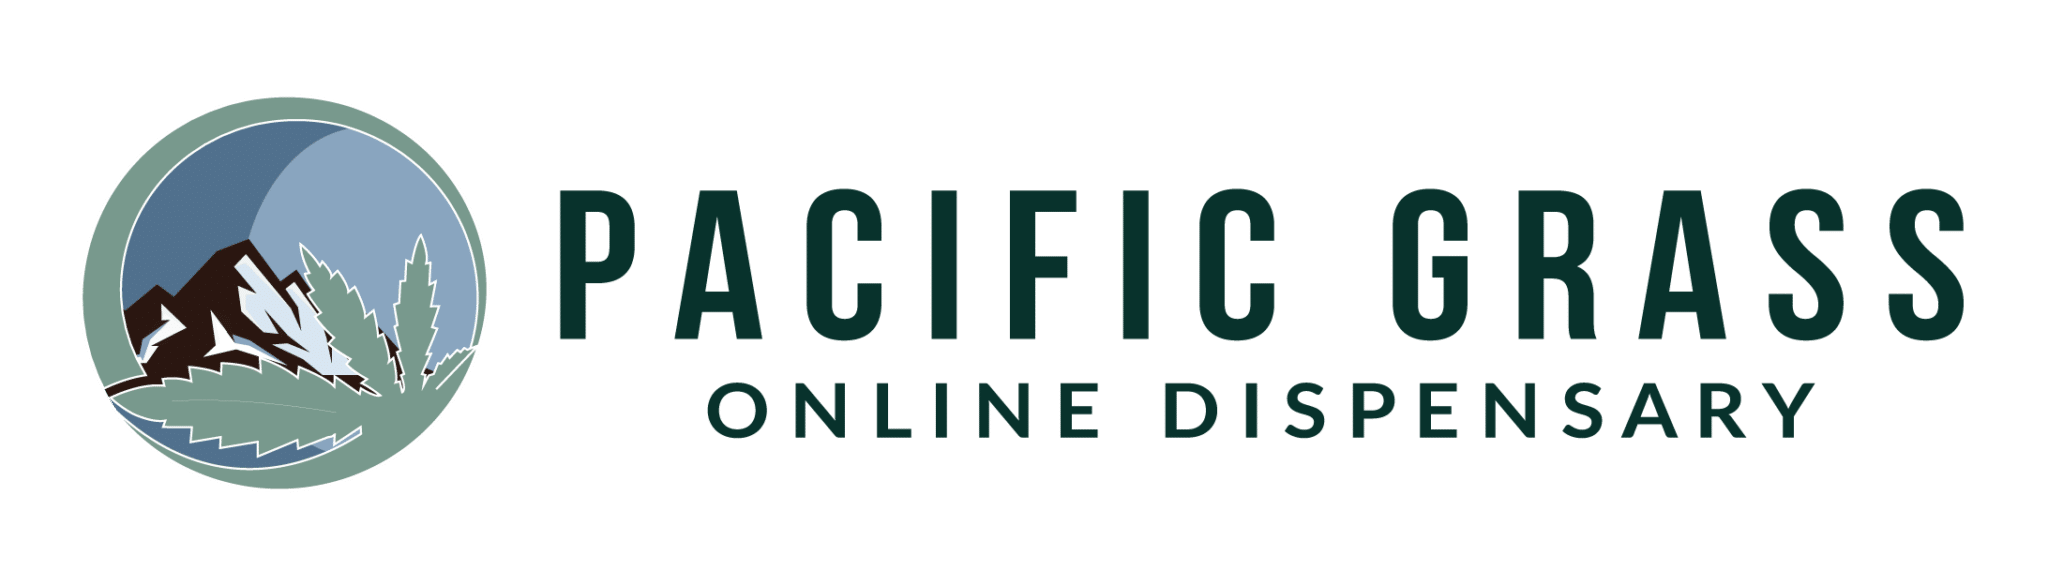 PACIFIC-GRASS-LOGO-HOR.png